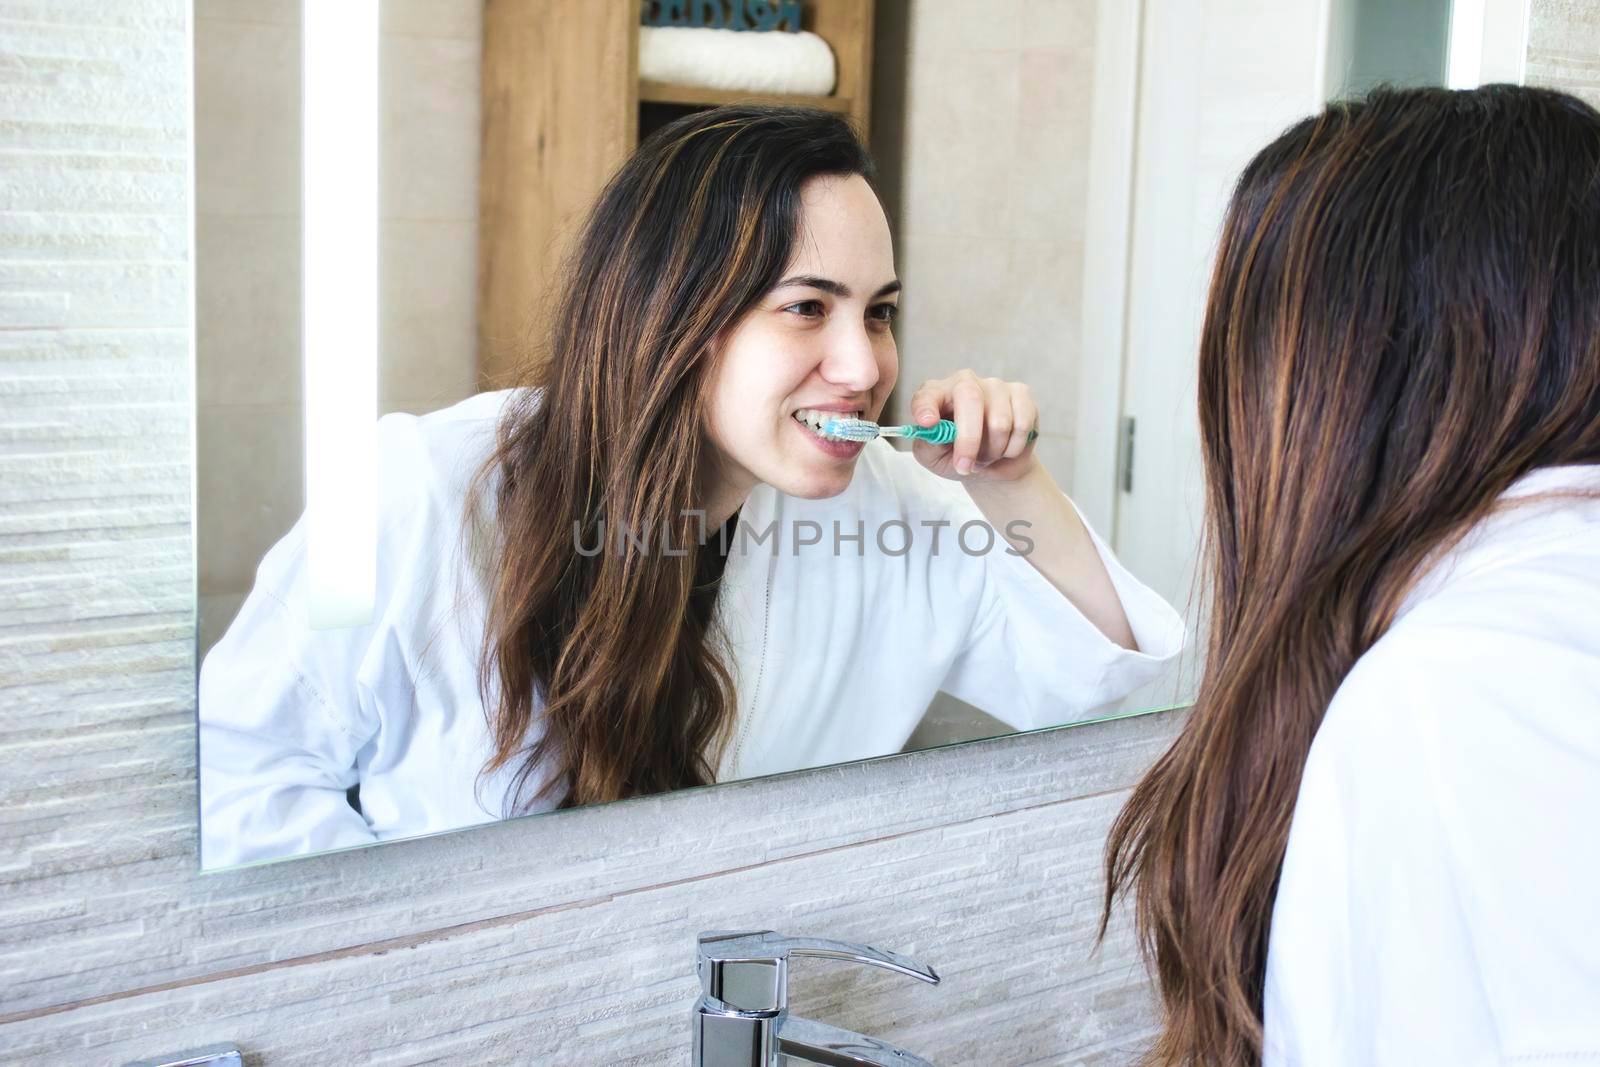 Lifestyle shot of attractive white Caucasian woman brushing her teeth in front of the bathroom mirror wearing a white robe